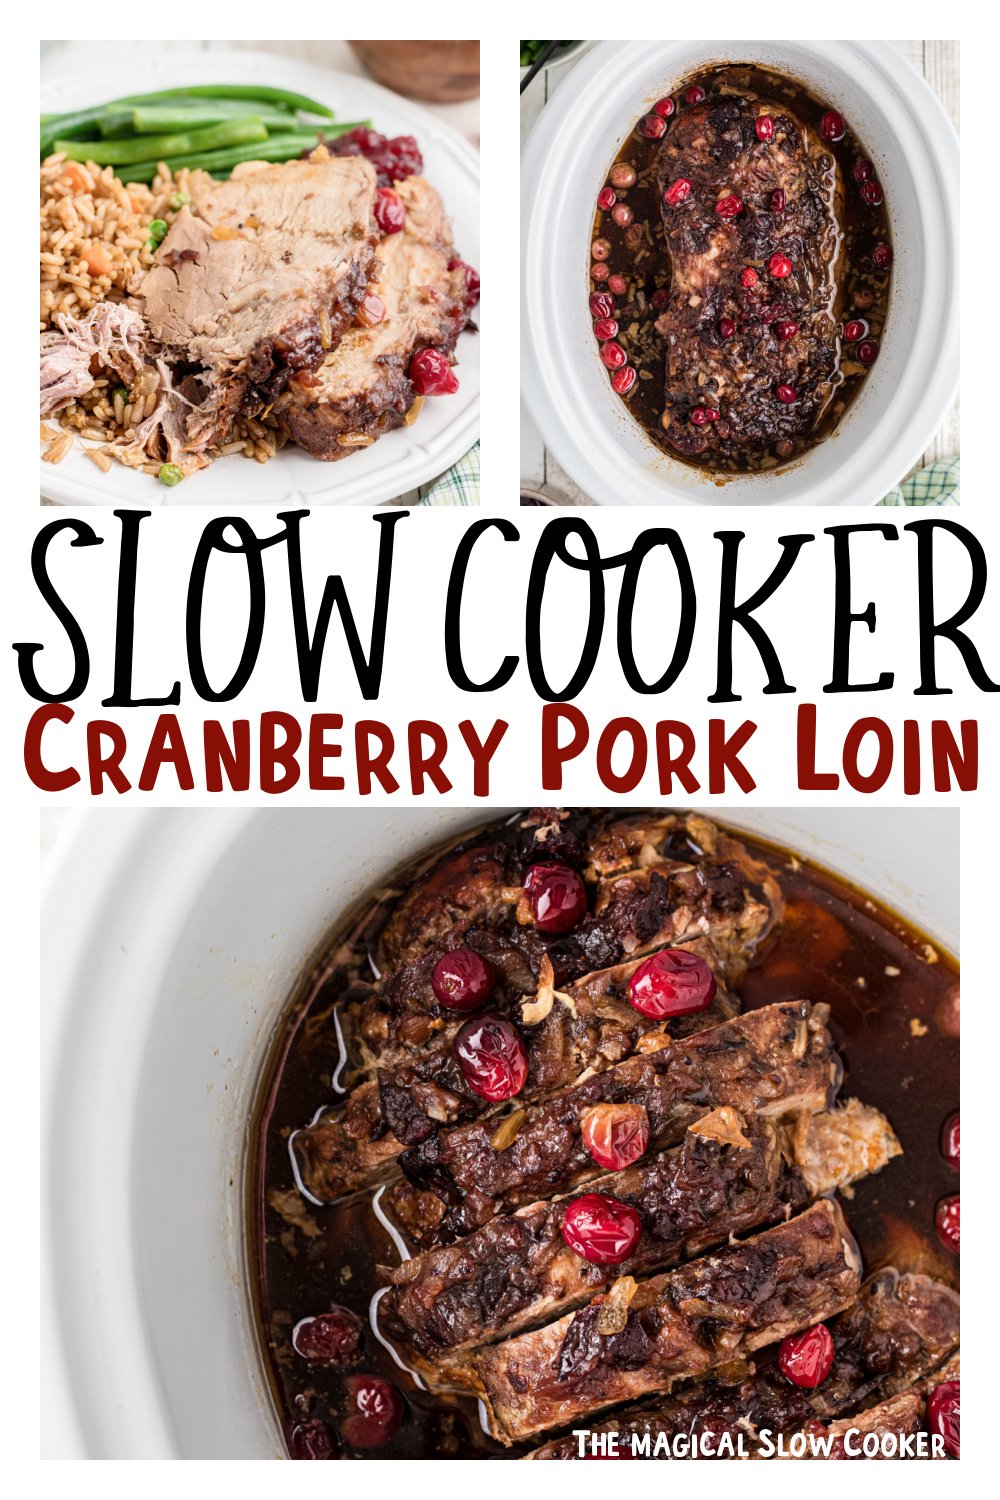 Images of cranberry pork loin with text overlay.